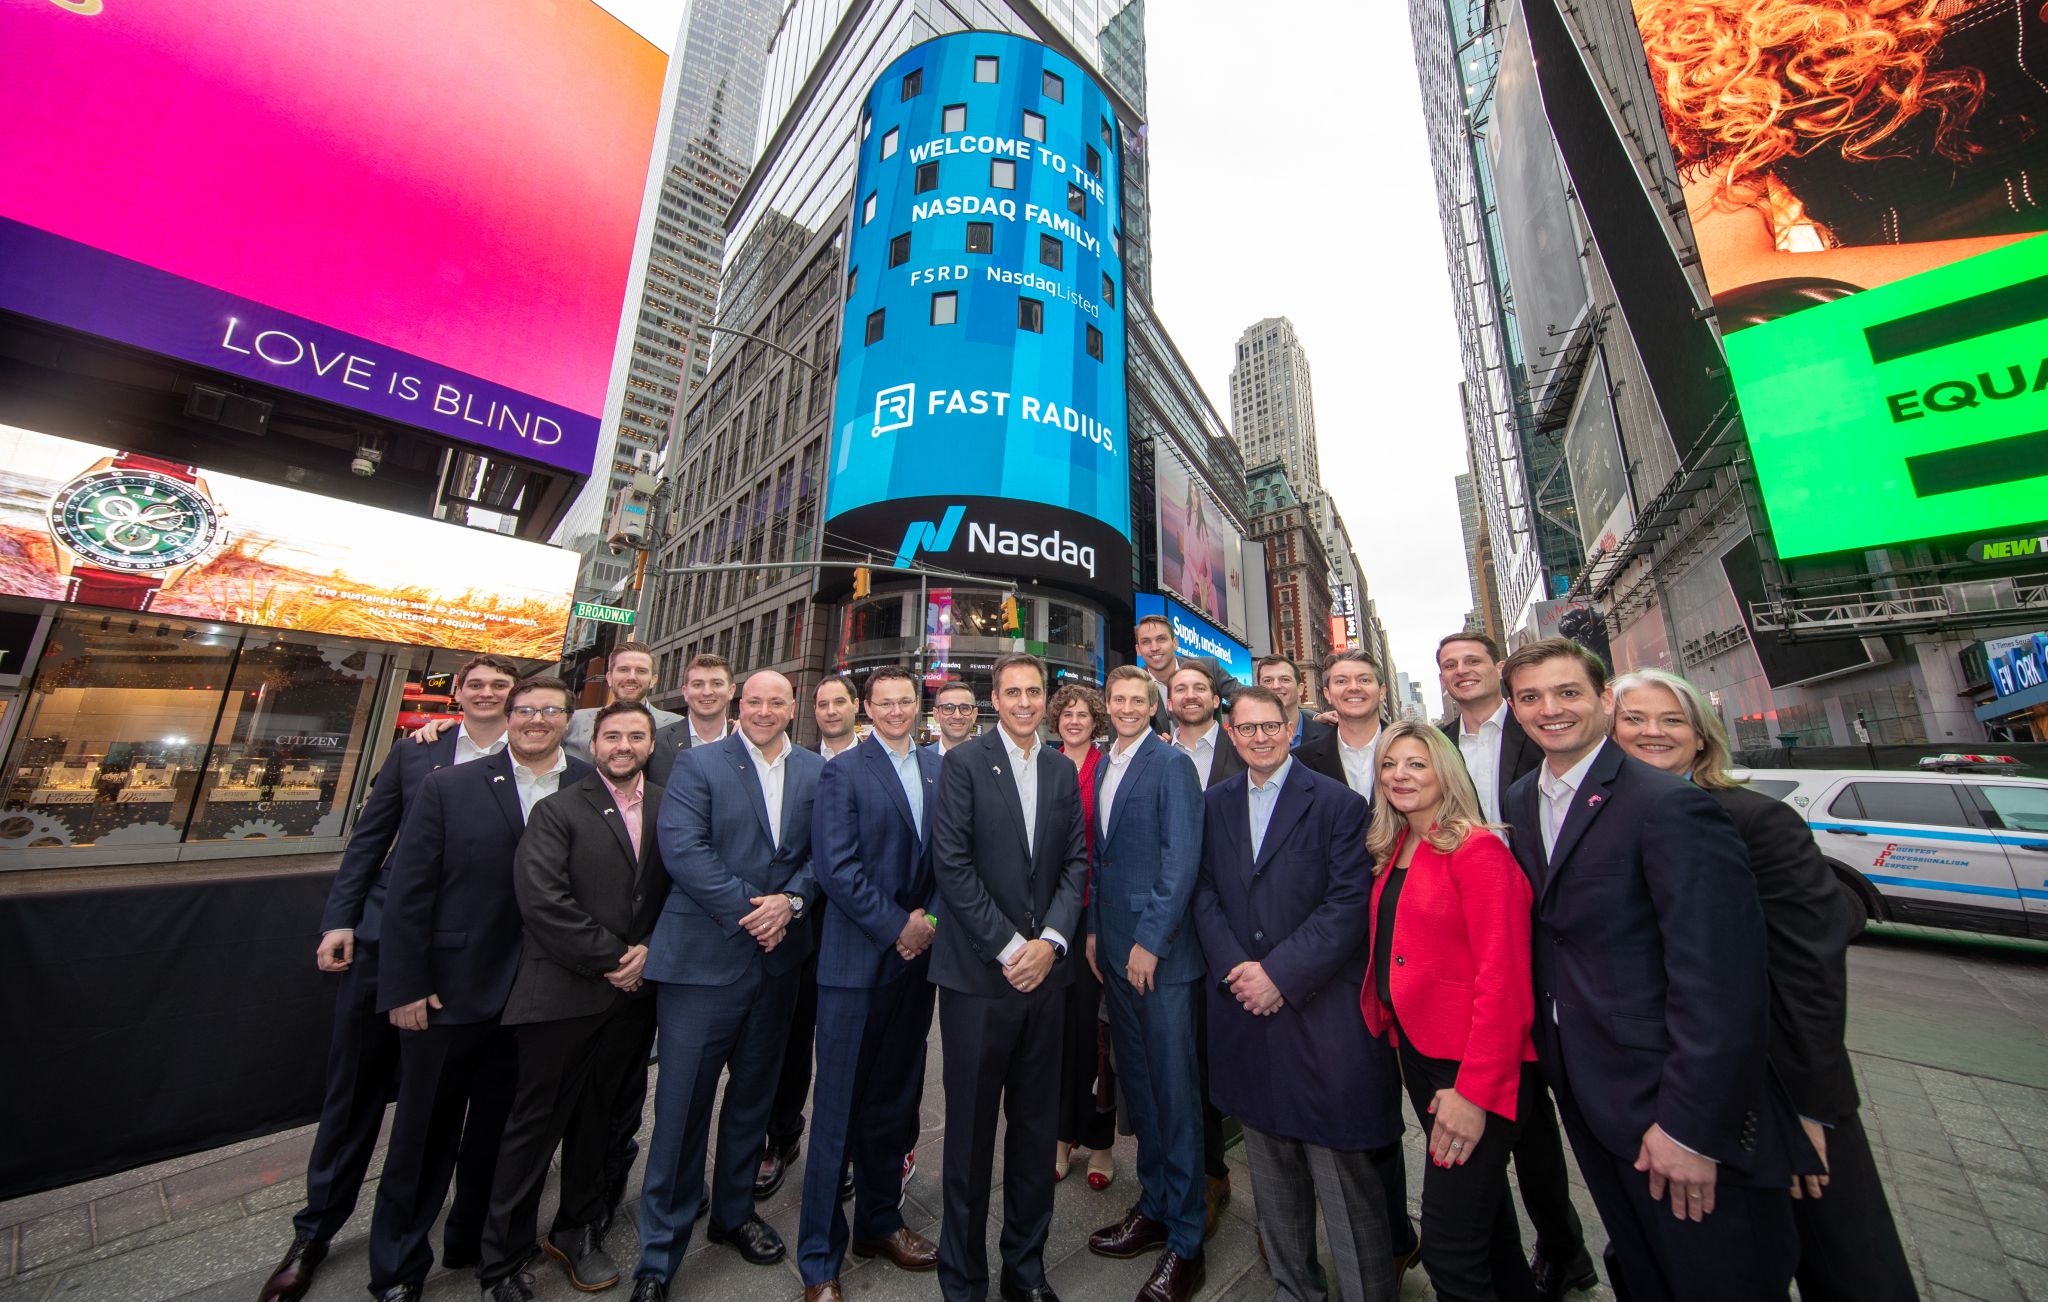 Fast Radius team takes photo outside Nasdaq during first trading day.